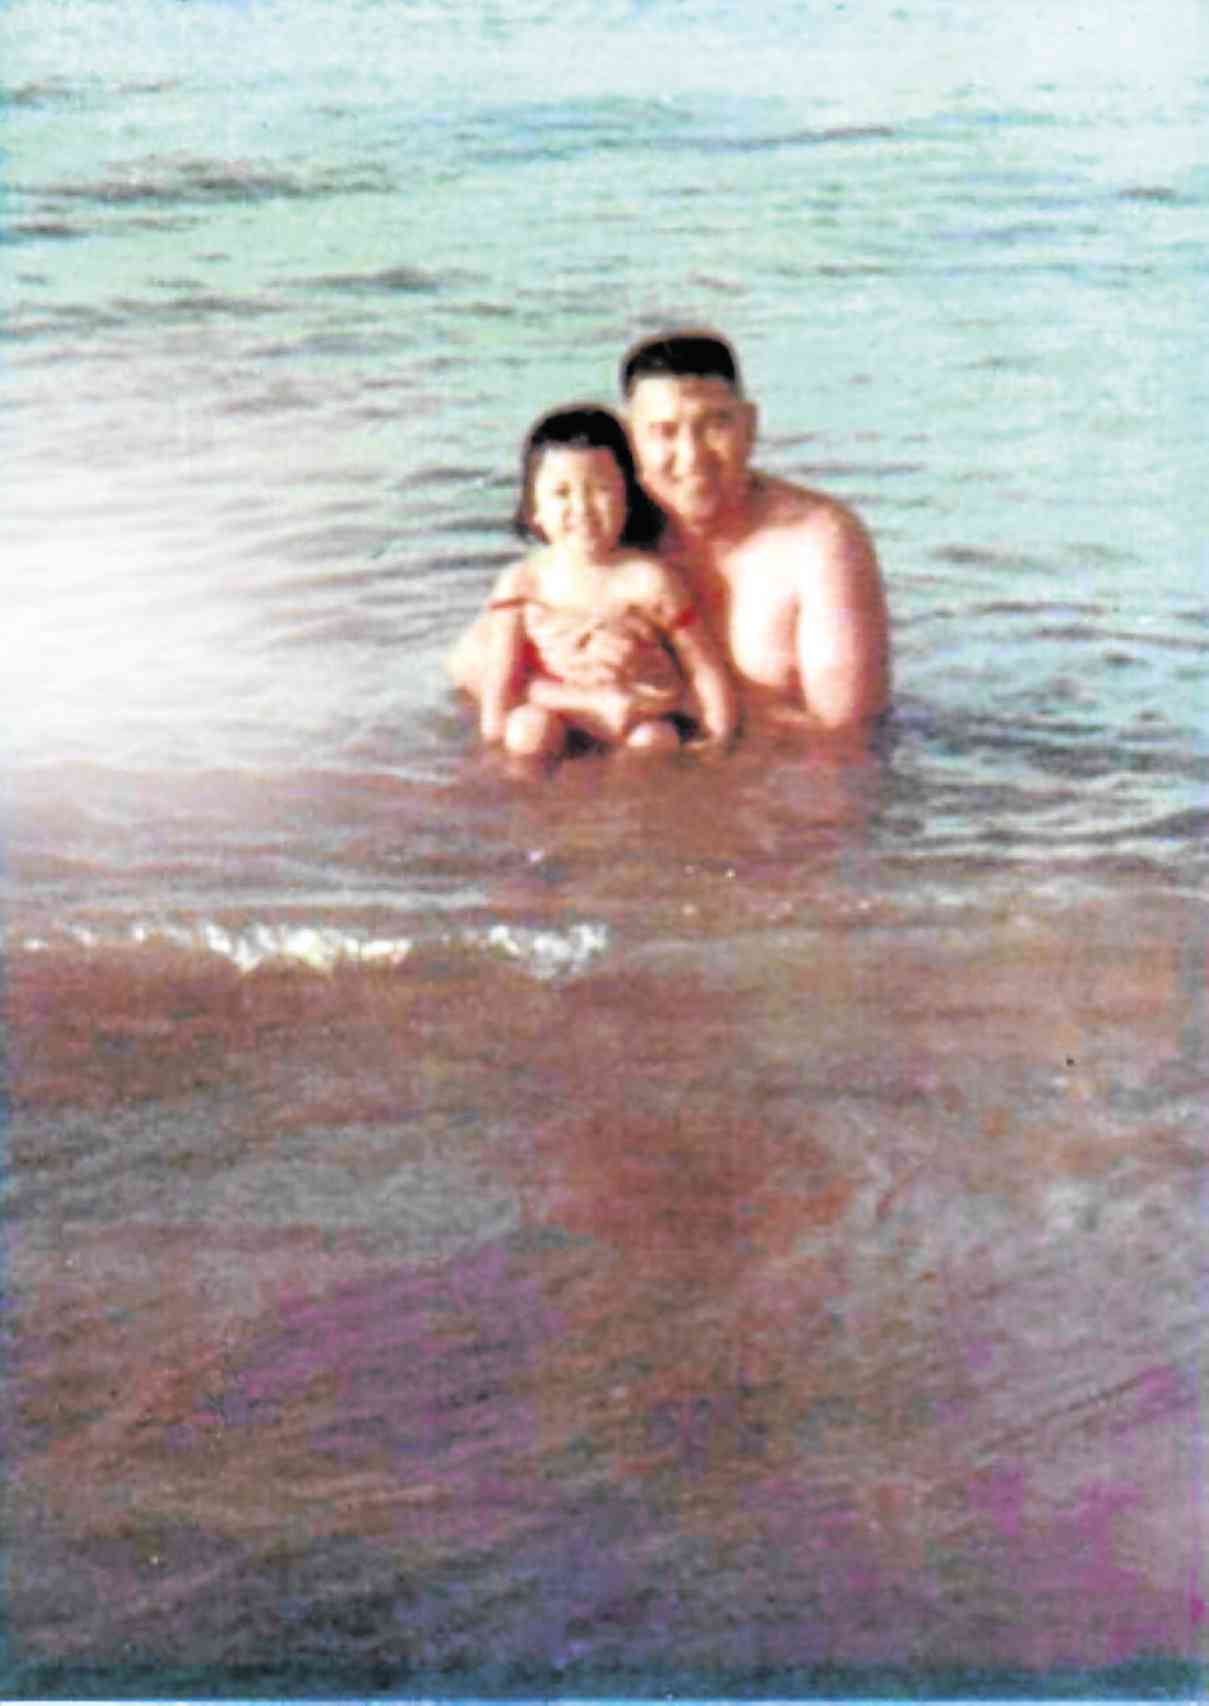 THE AUTHOR at age 4 and her father in La Union